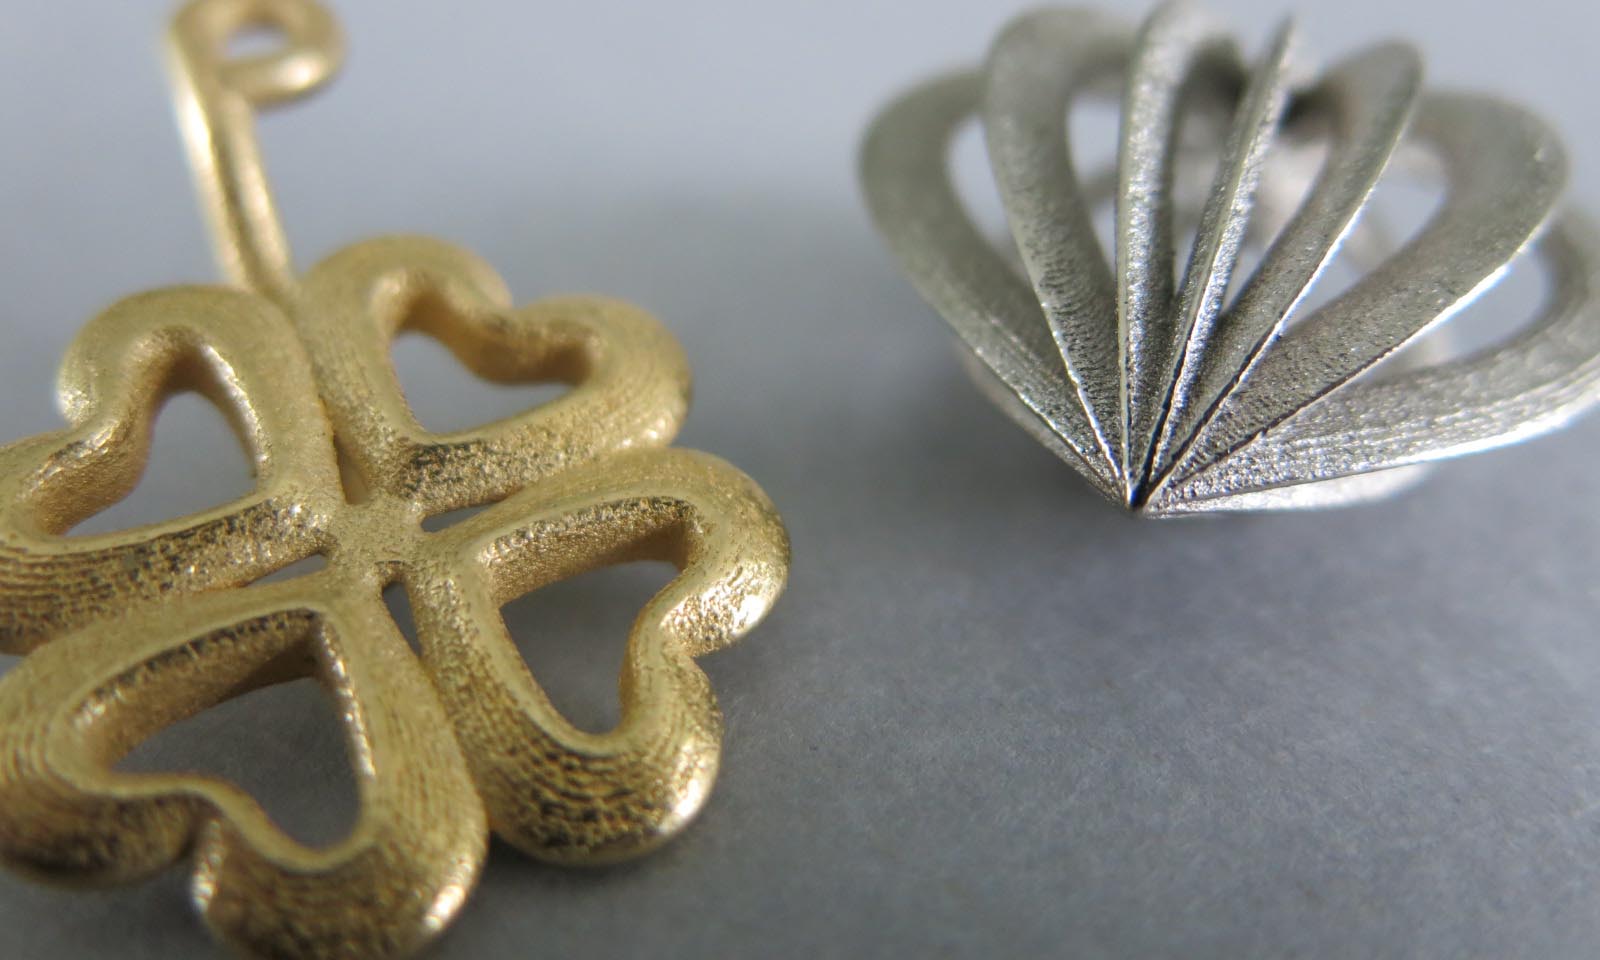 3D printed jewelry with Binder Jetting Stainless Steel